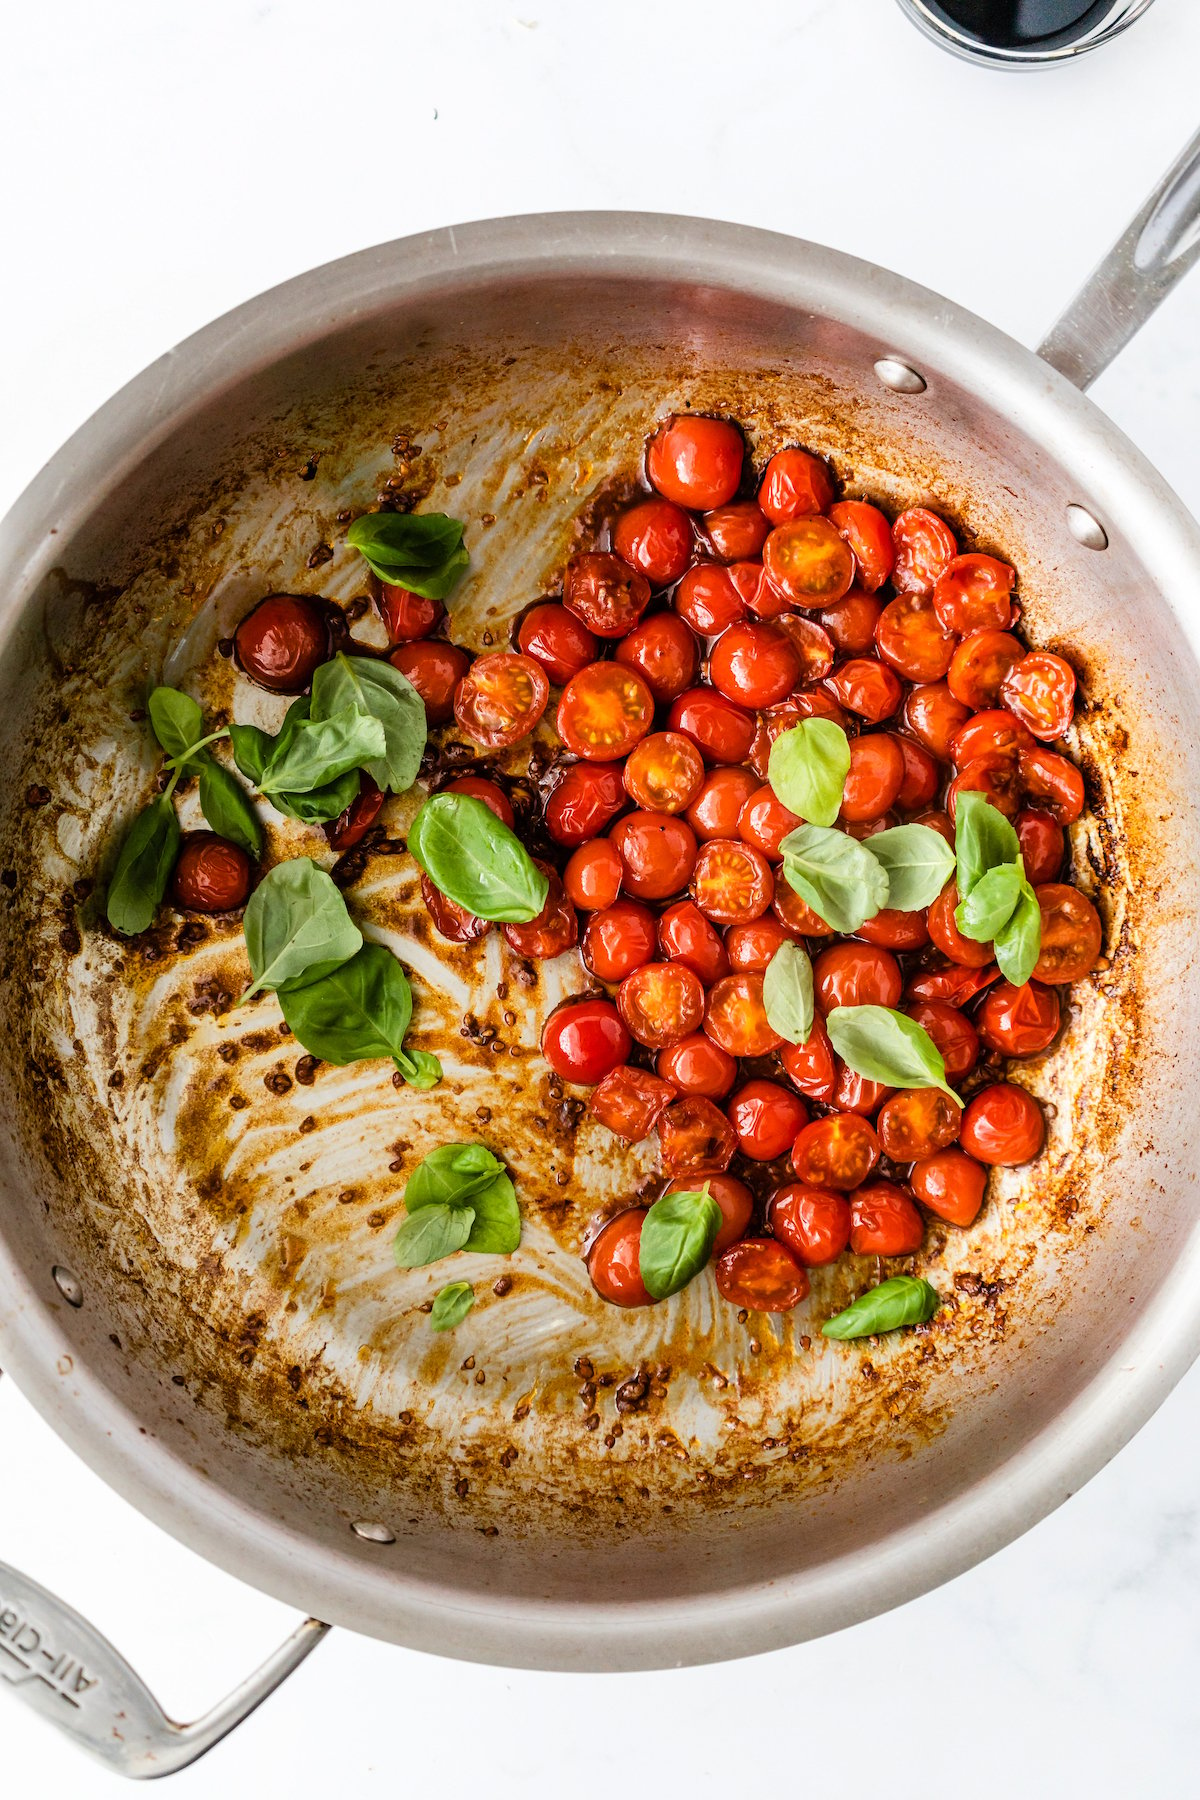 Cherry tomatoes and fresh basil in a pan.